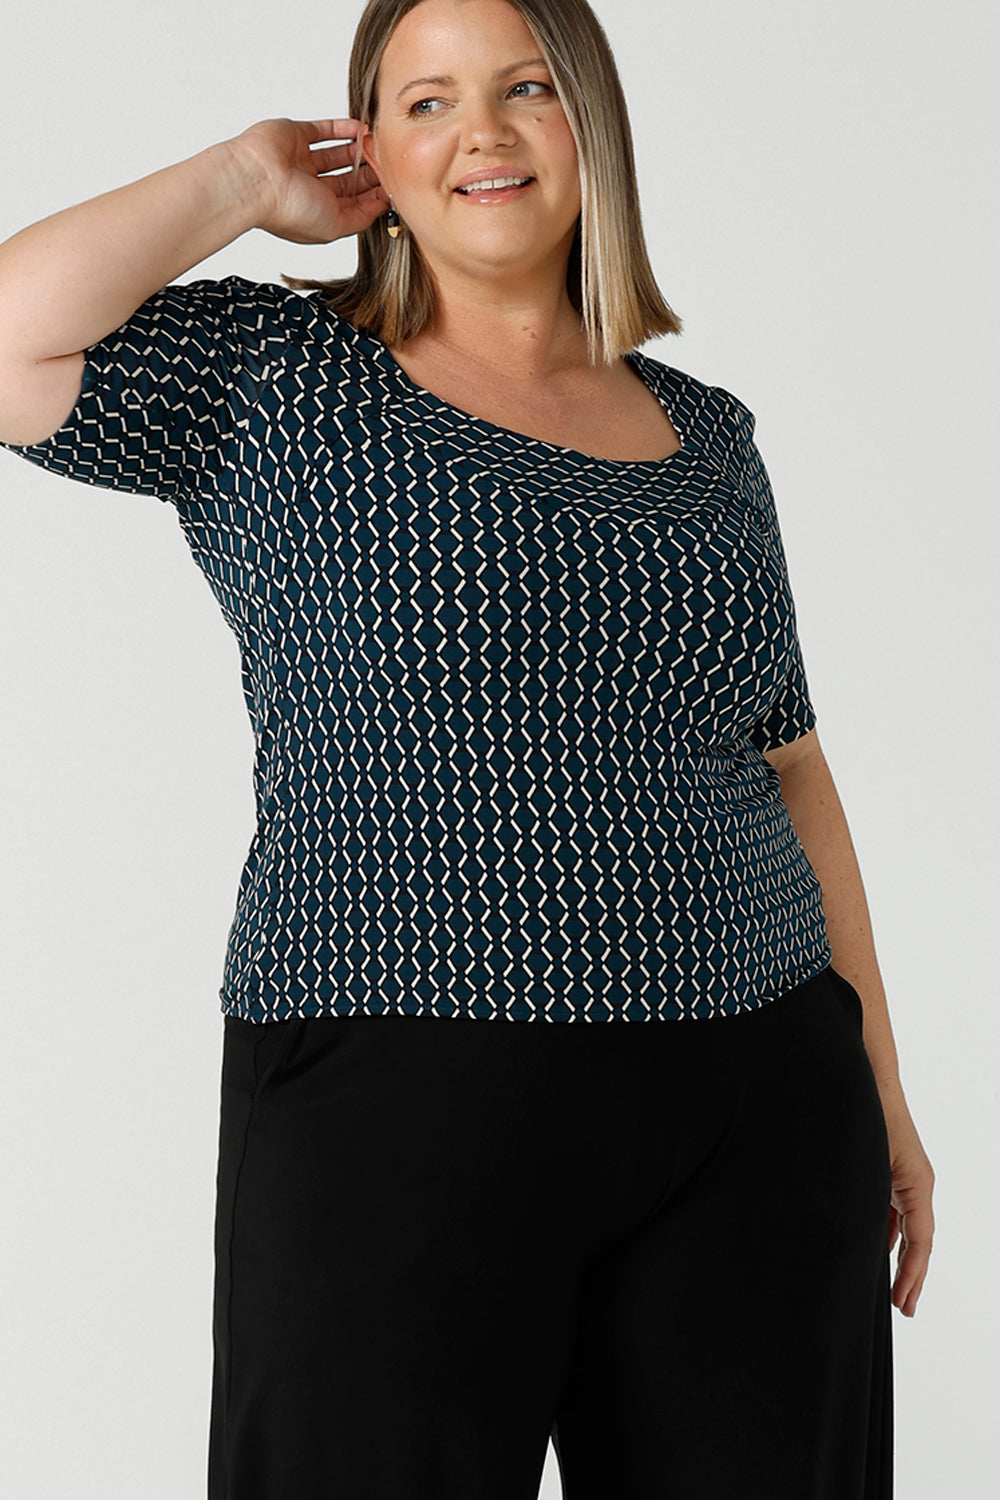 A plus size 16 woman wears the Berni Top in Infinity with a jade base colour and geometric pattern. A comfortable jersey work top style back with the Lulu pants in navy. Made in Australia for women size 8 - 24.